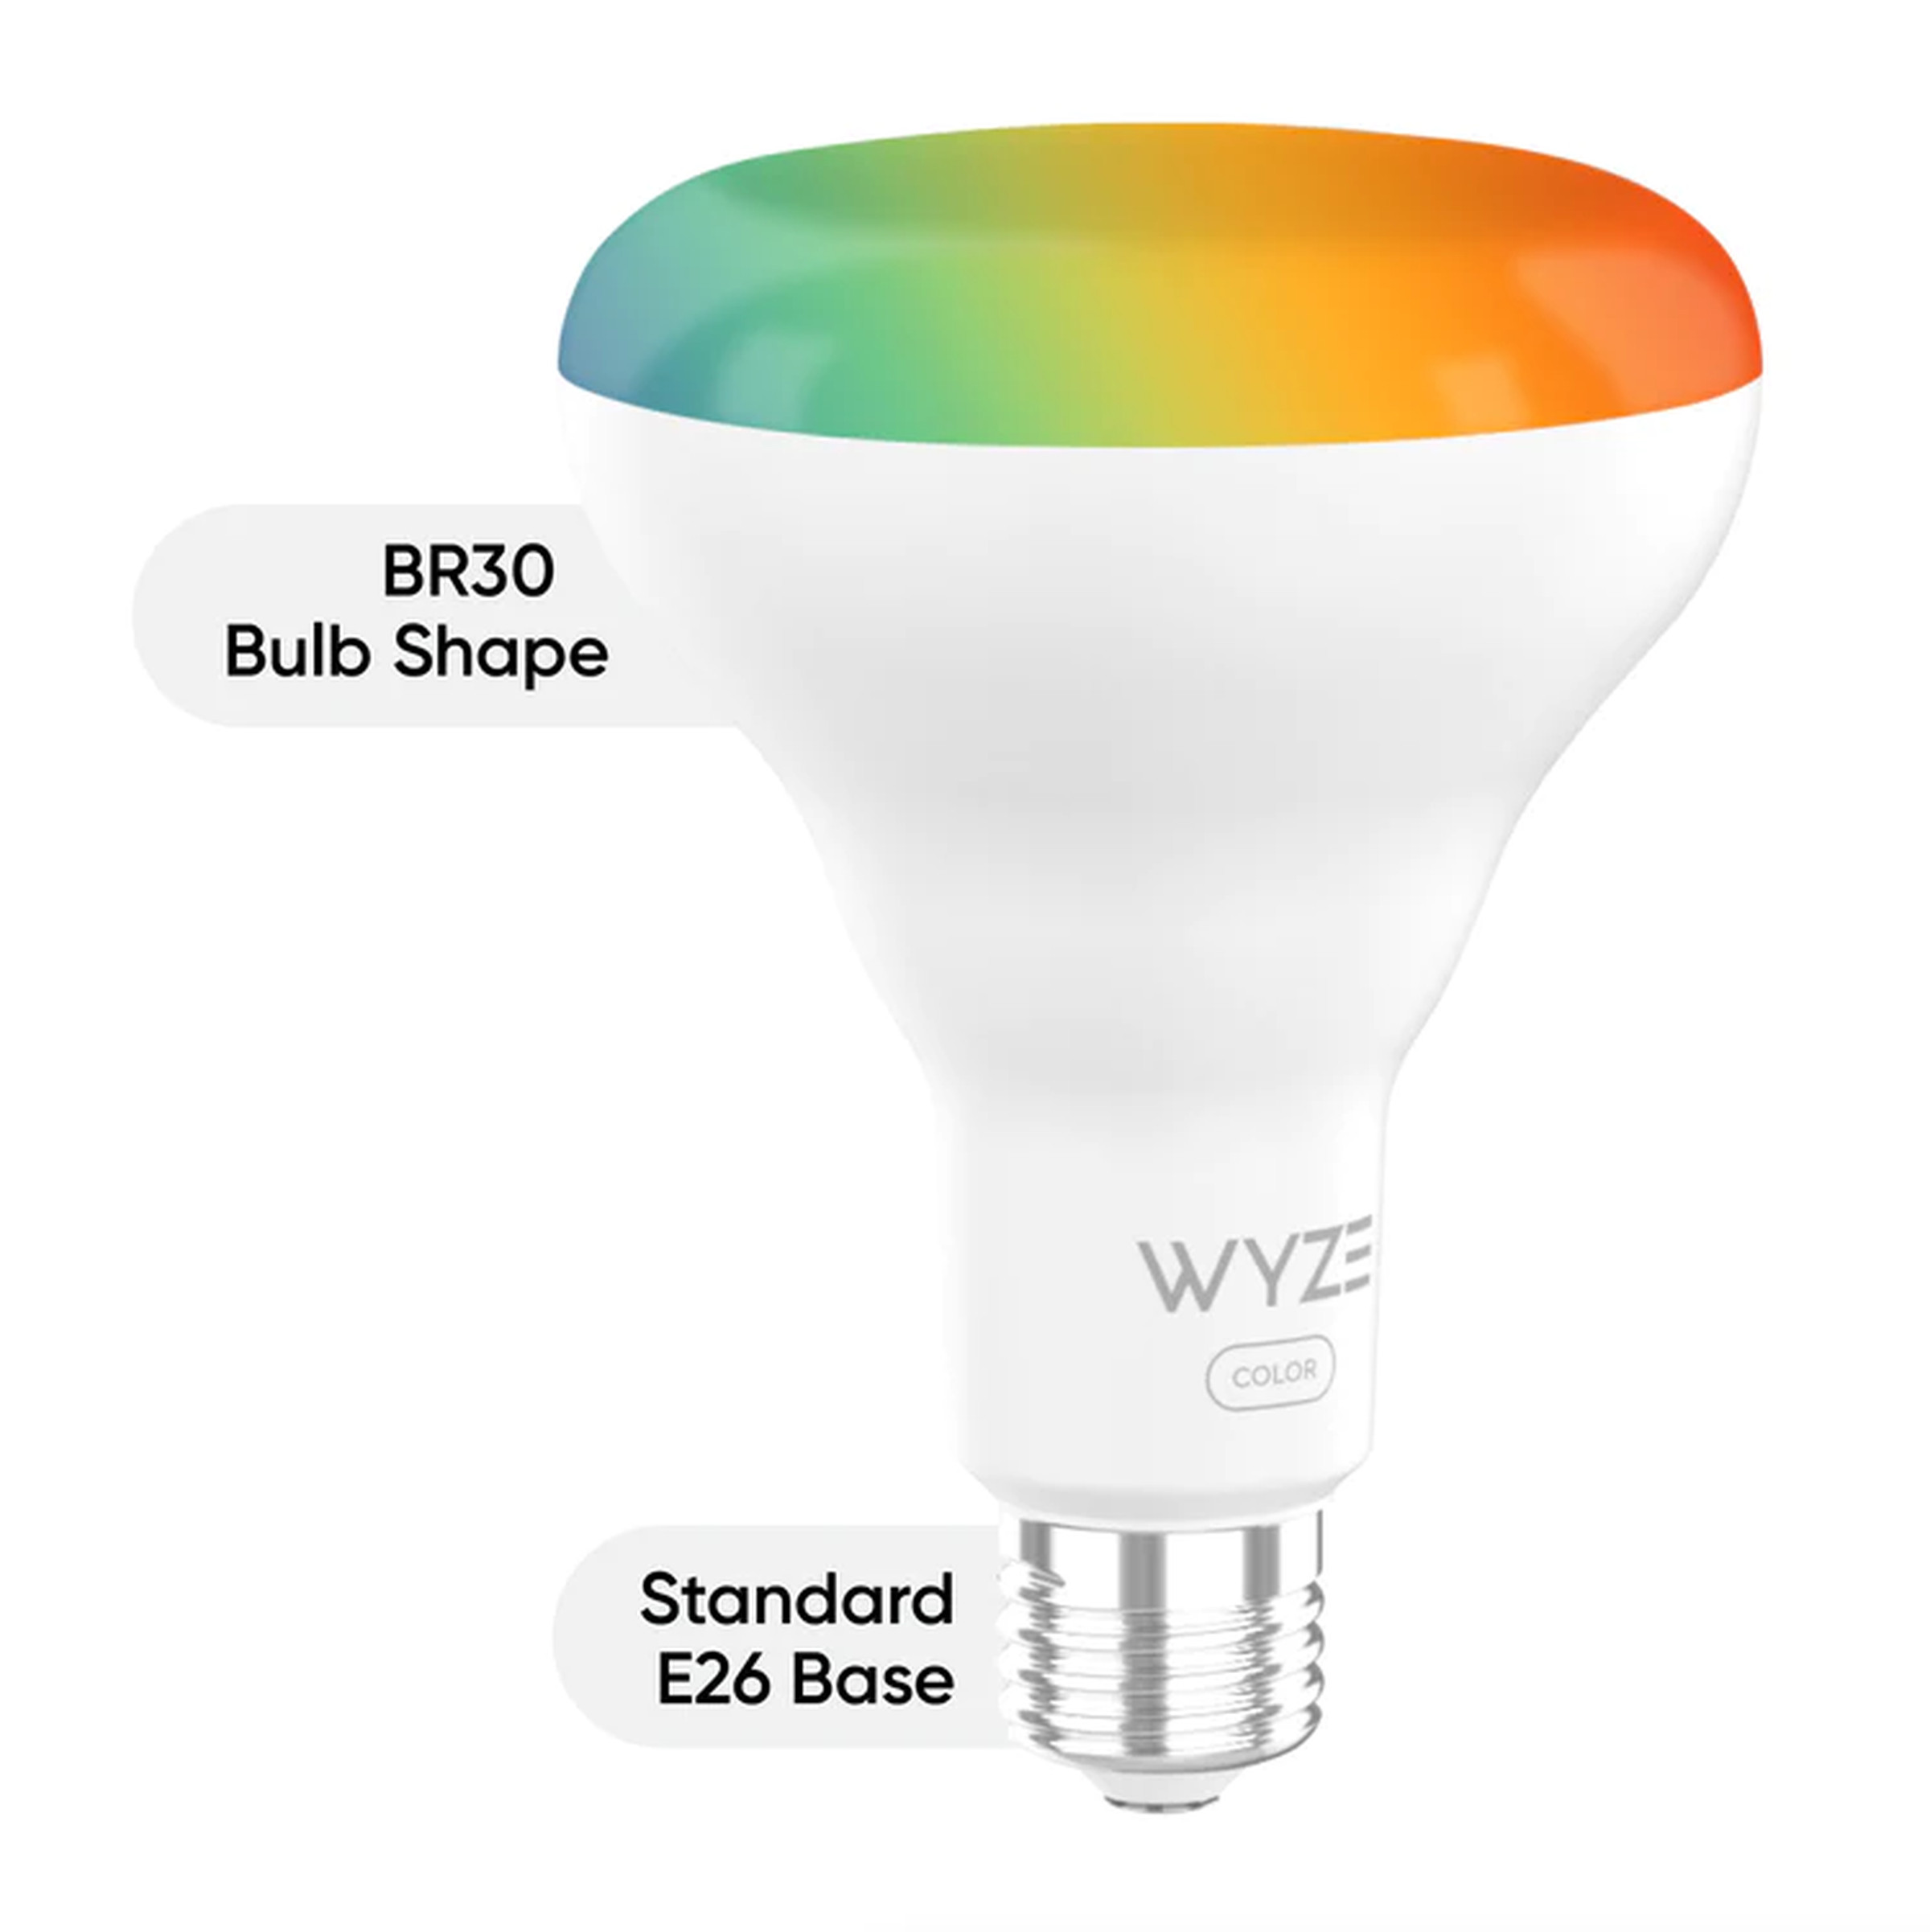 The Wyze Color Bulb BR30 fits in a standard E26 base.